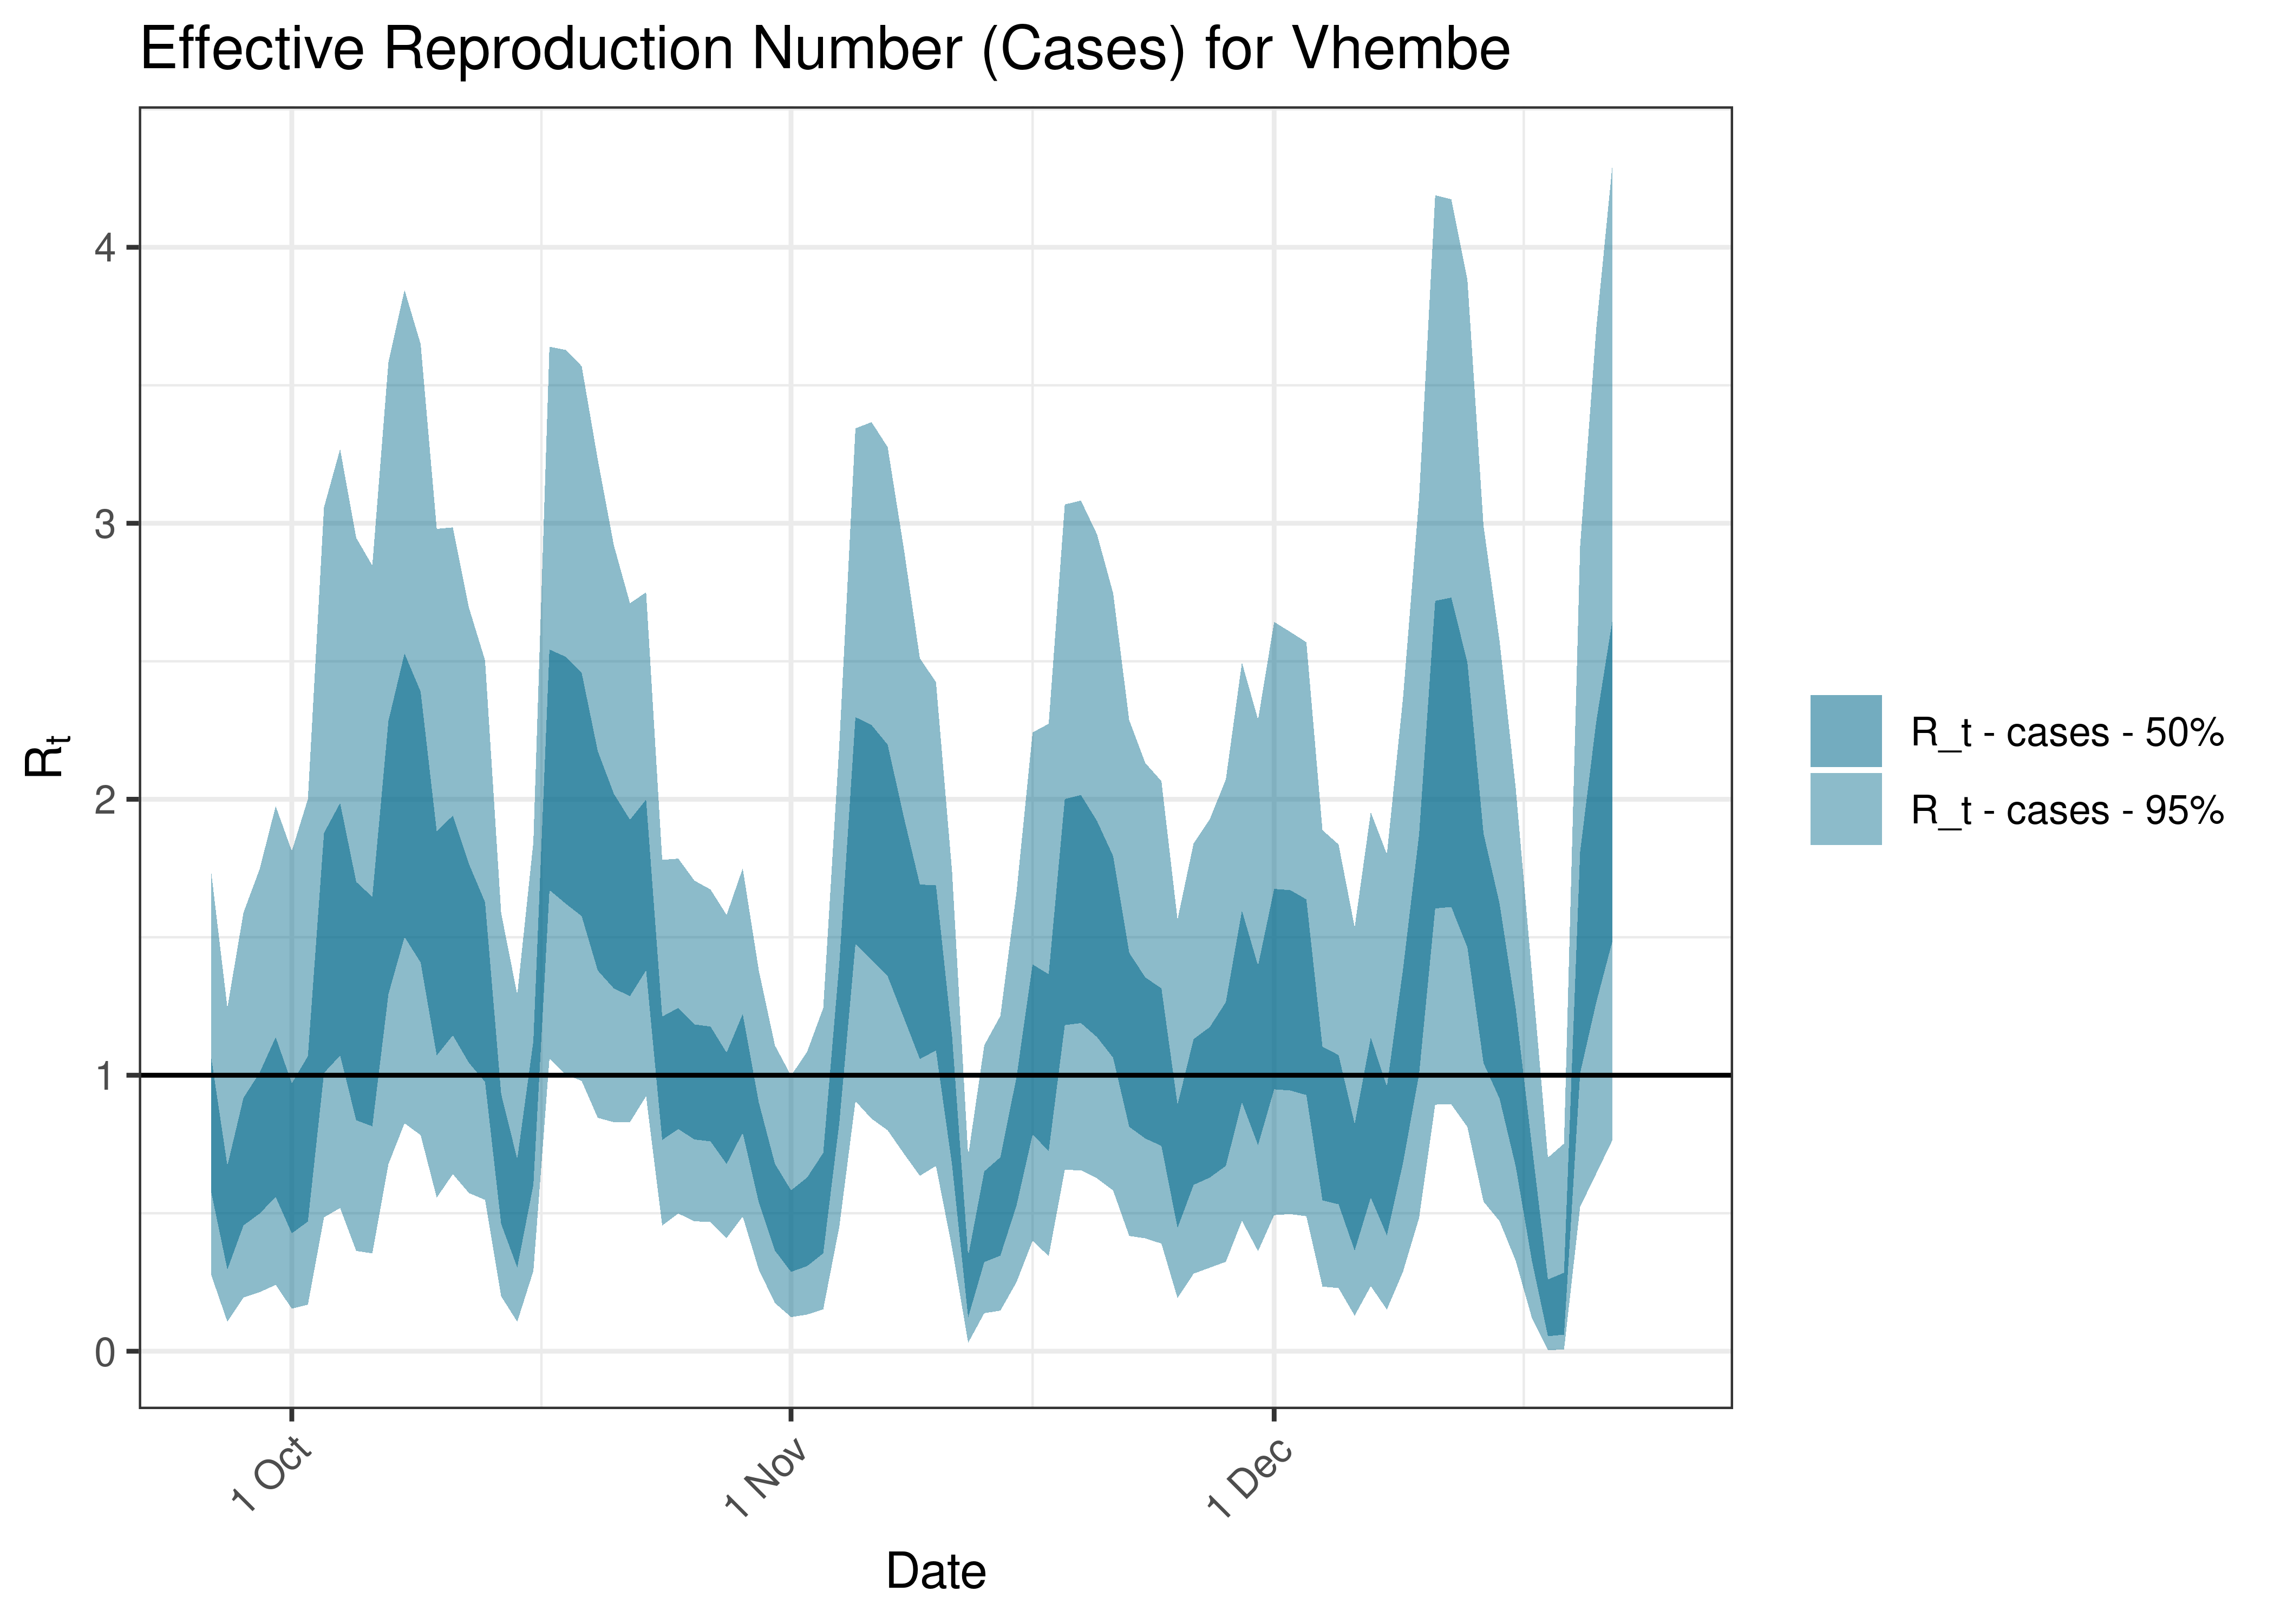 Estimated Effective Reproduction Number Based on Cases for Vhembe over last 90 days